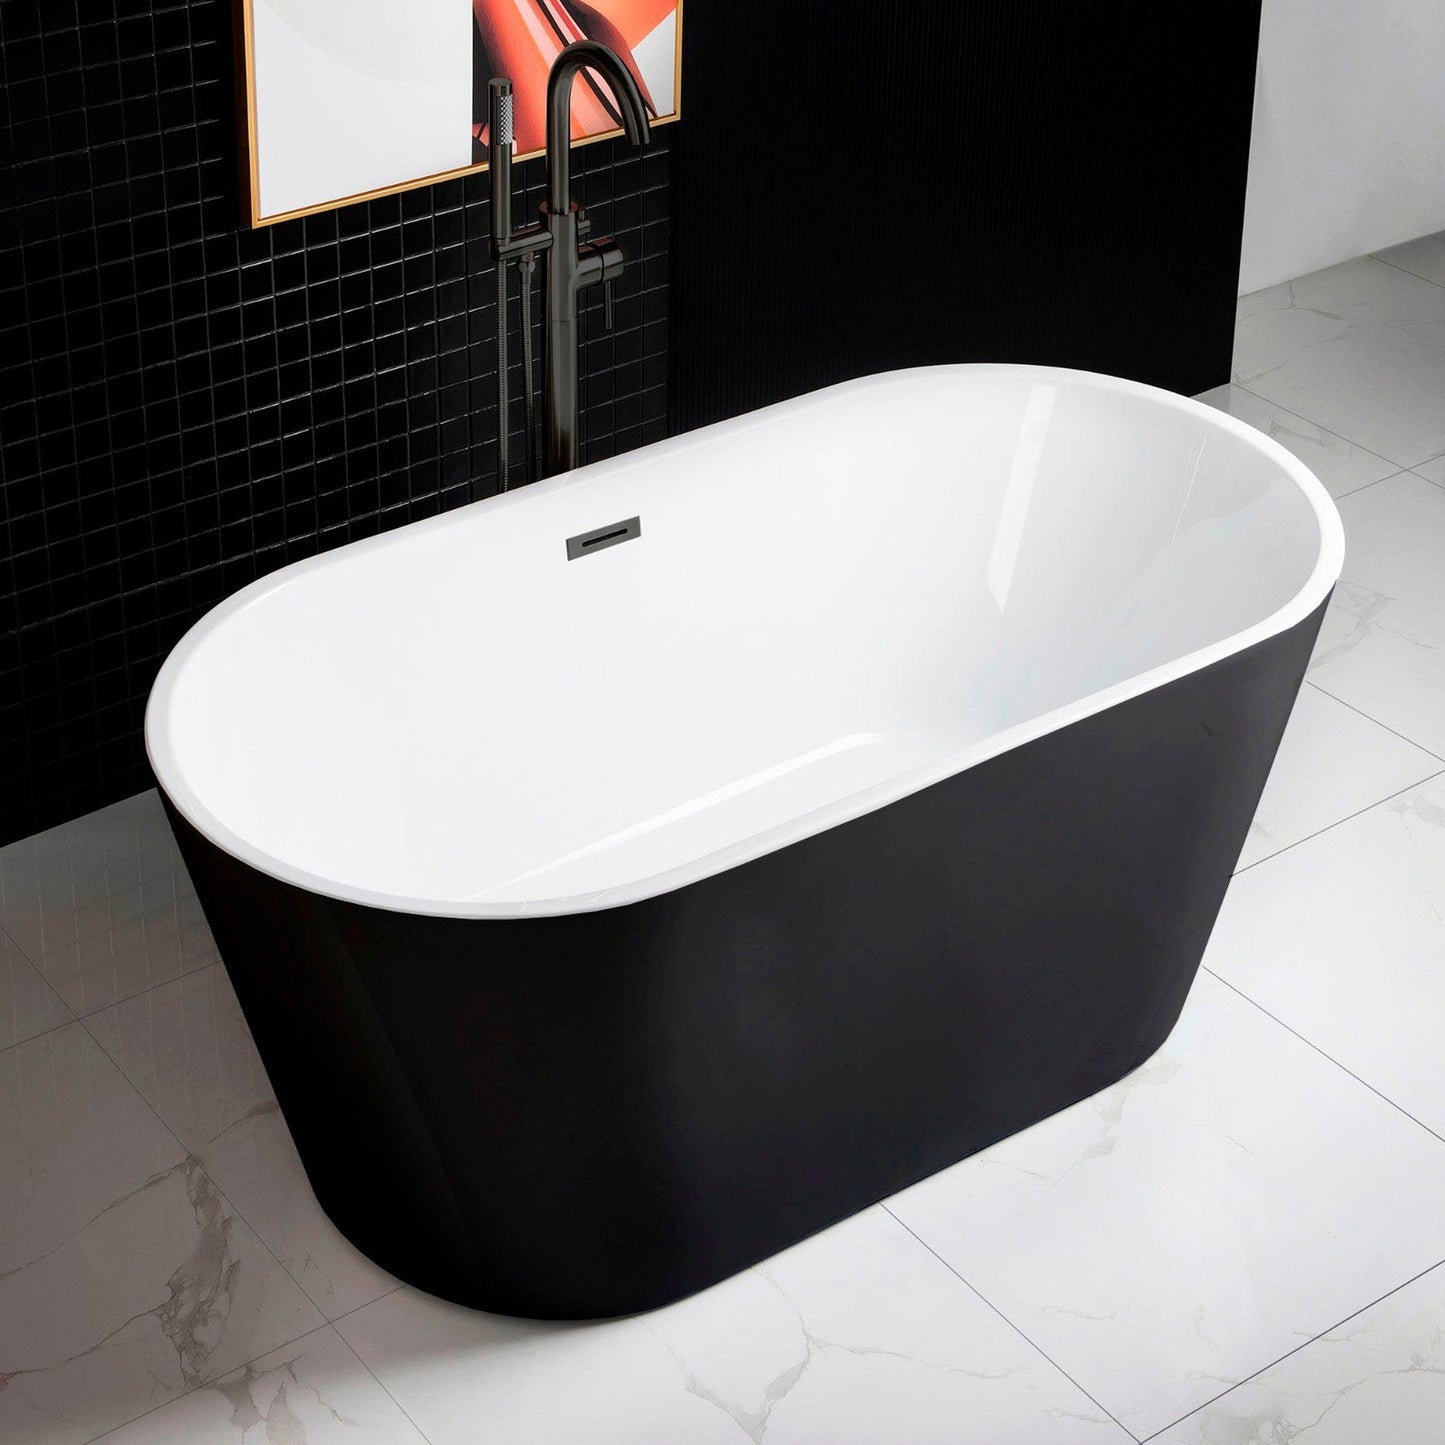 WoodBridge 59" Black Acrylic Freestanding Contemporary Soaking Bathtub With Matte Black Drain, Overflow, F0025MBVT Tub Filler and Caddy Tray